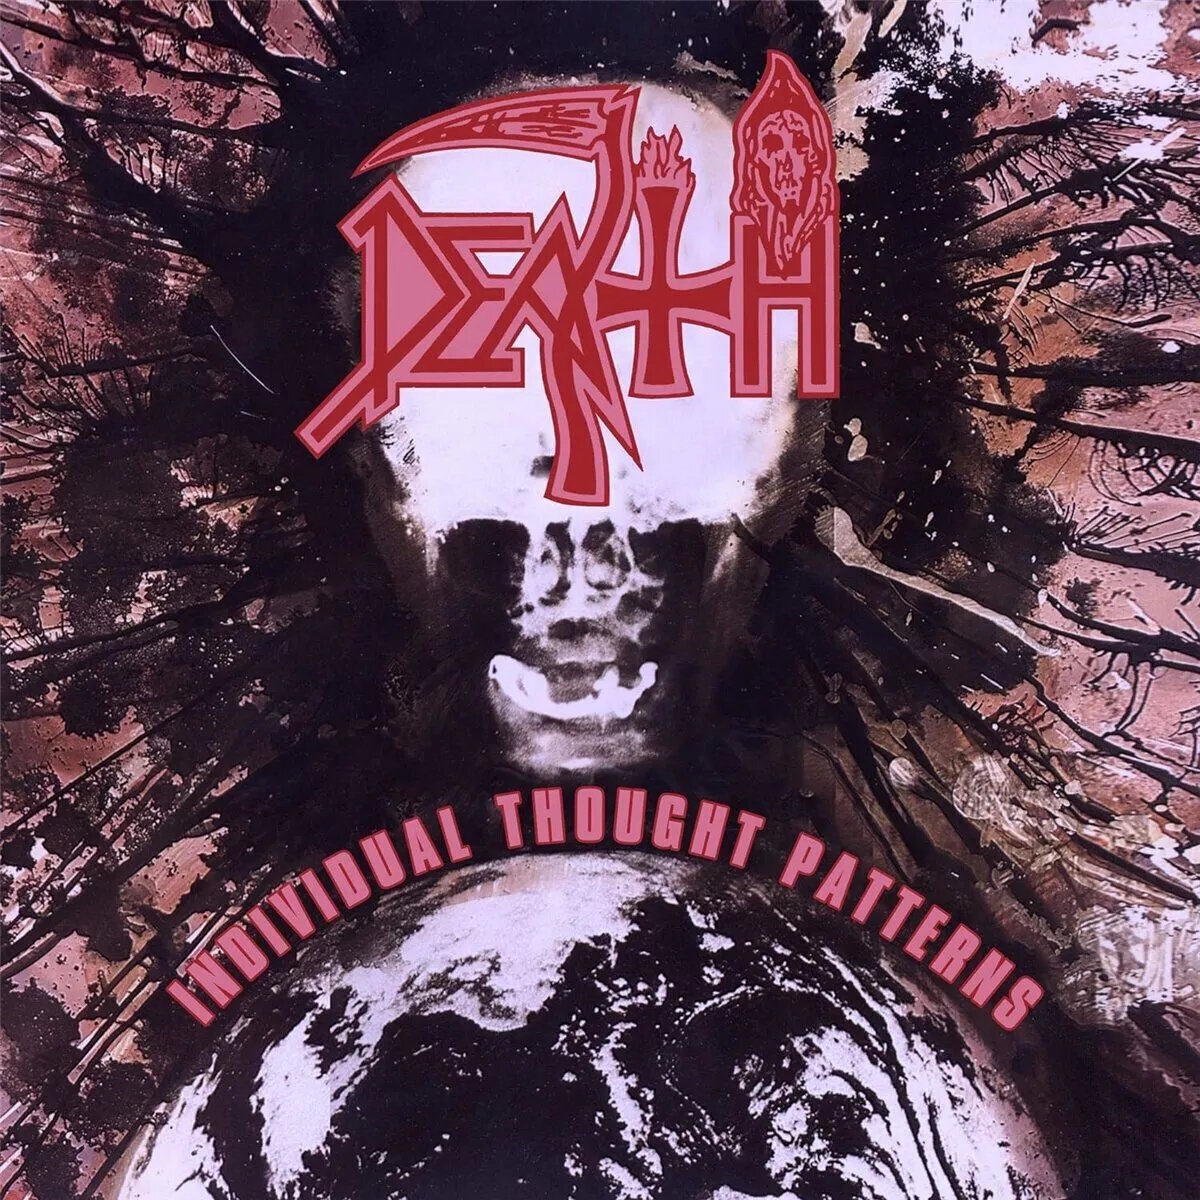 Disco de vinilo Death - Individual Thought Patterns (Tri Colour Merge Splatter Coloured) (Deluxe Edition) (Limited Edition) (Reissue) (Remastered) (LP)